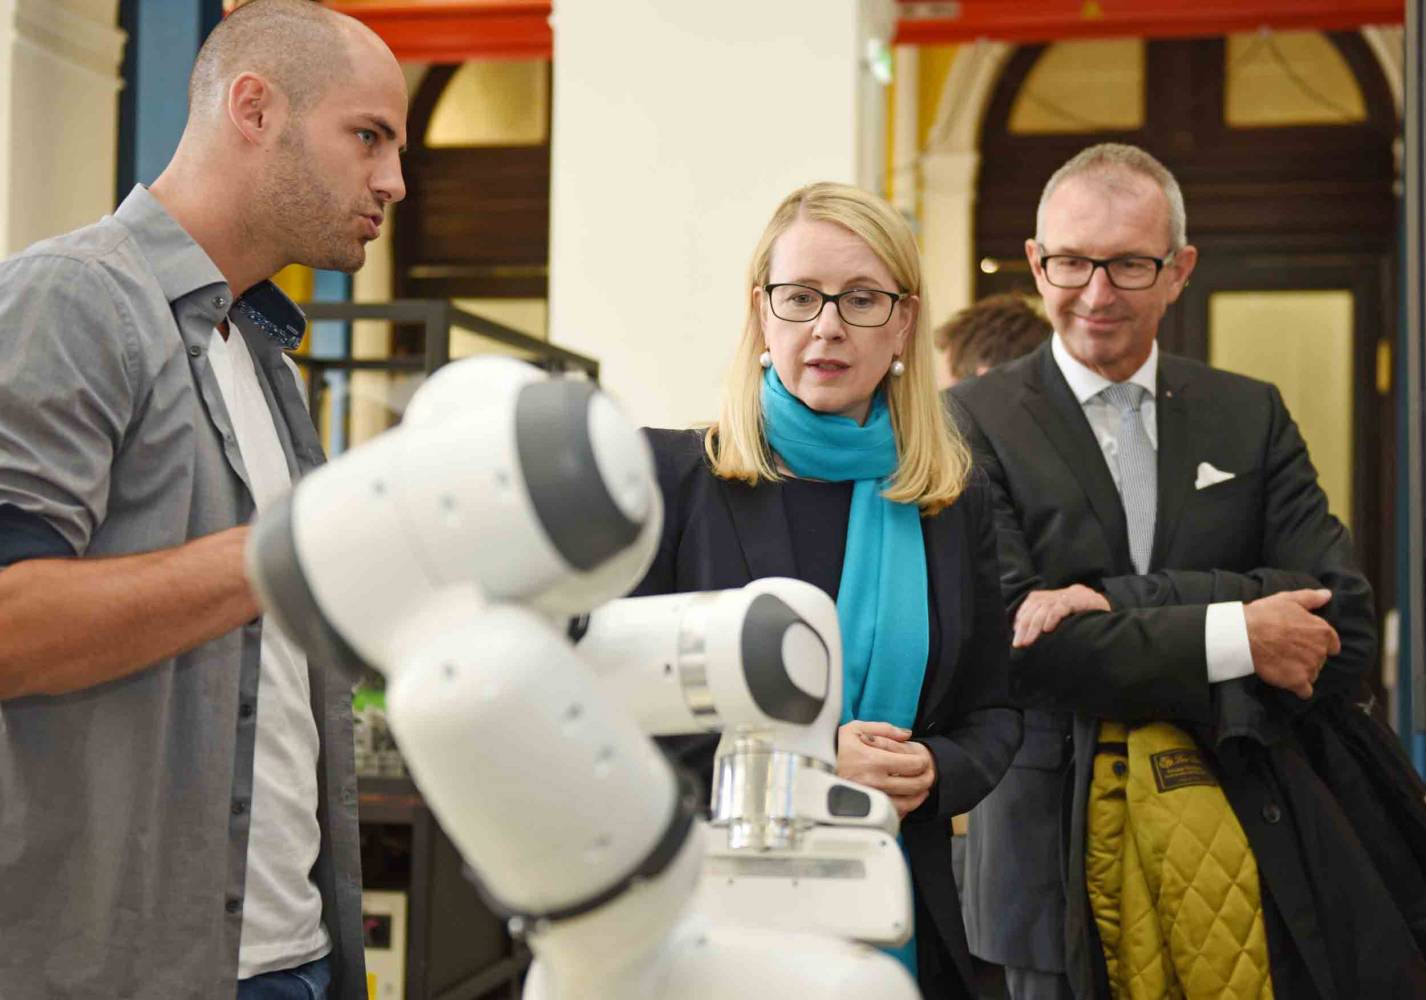 Federal Minister Margarete Schramböck also visited the technical departments of the MCI.